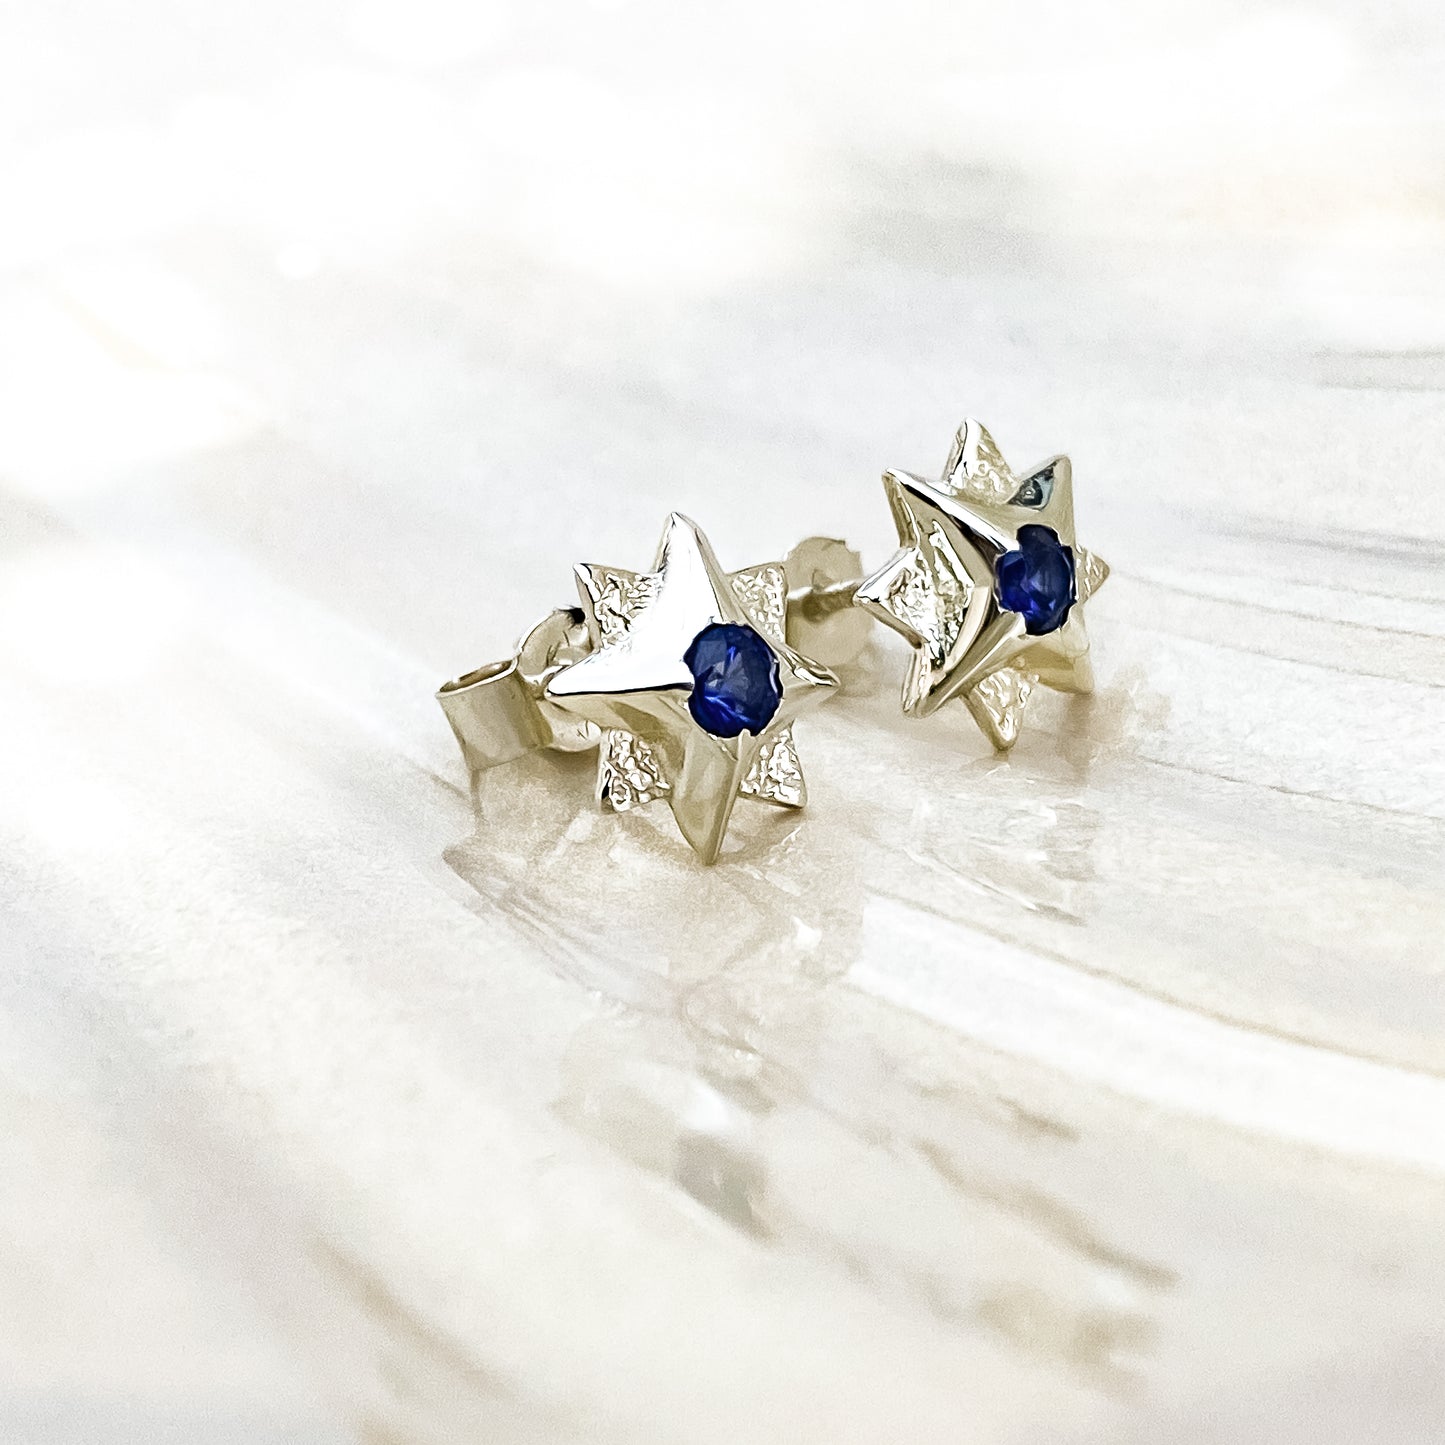 White Gold North Star Stud Earrings with Sapphire